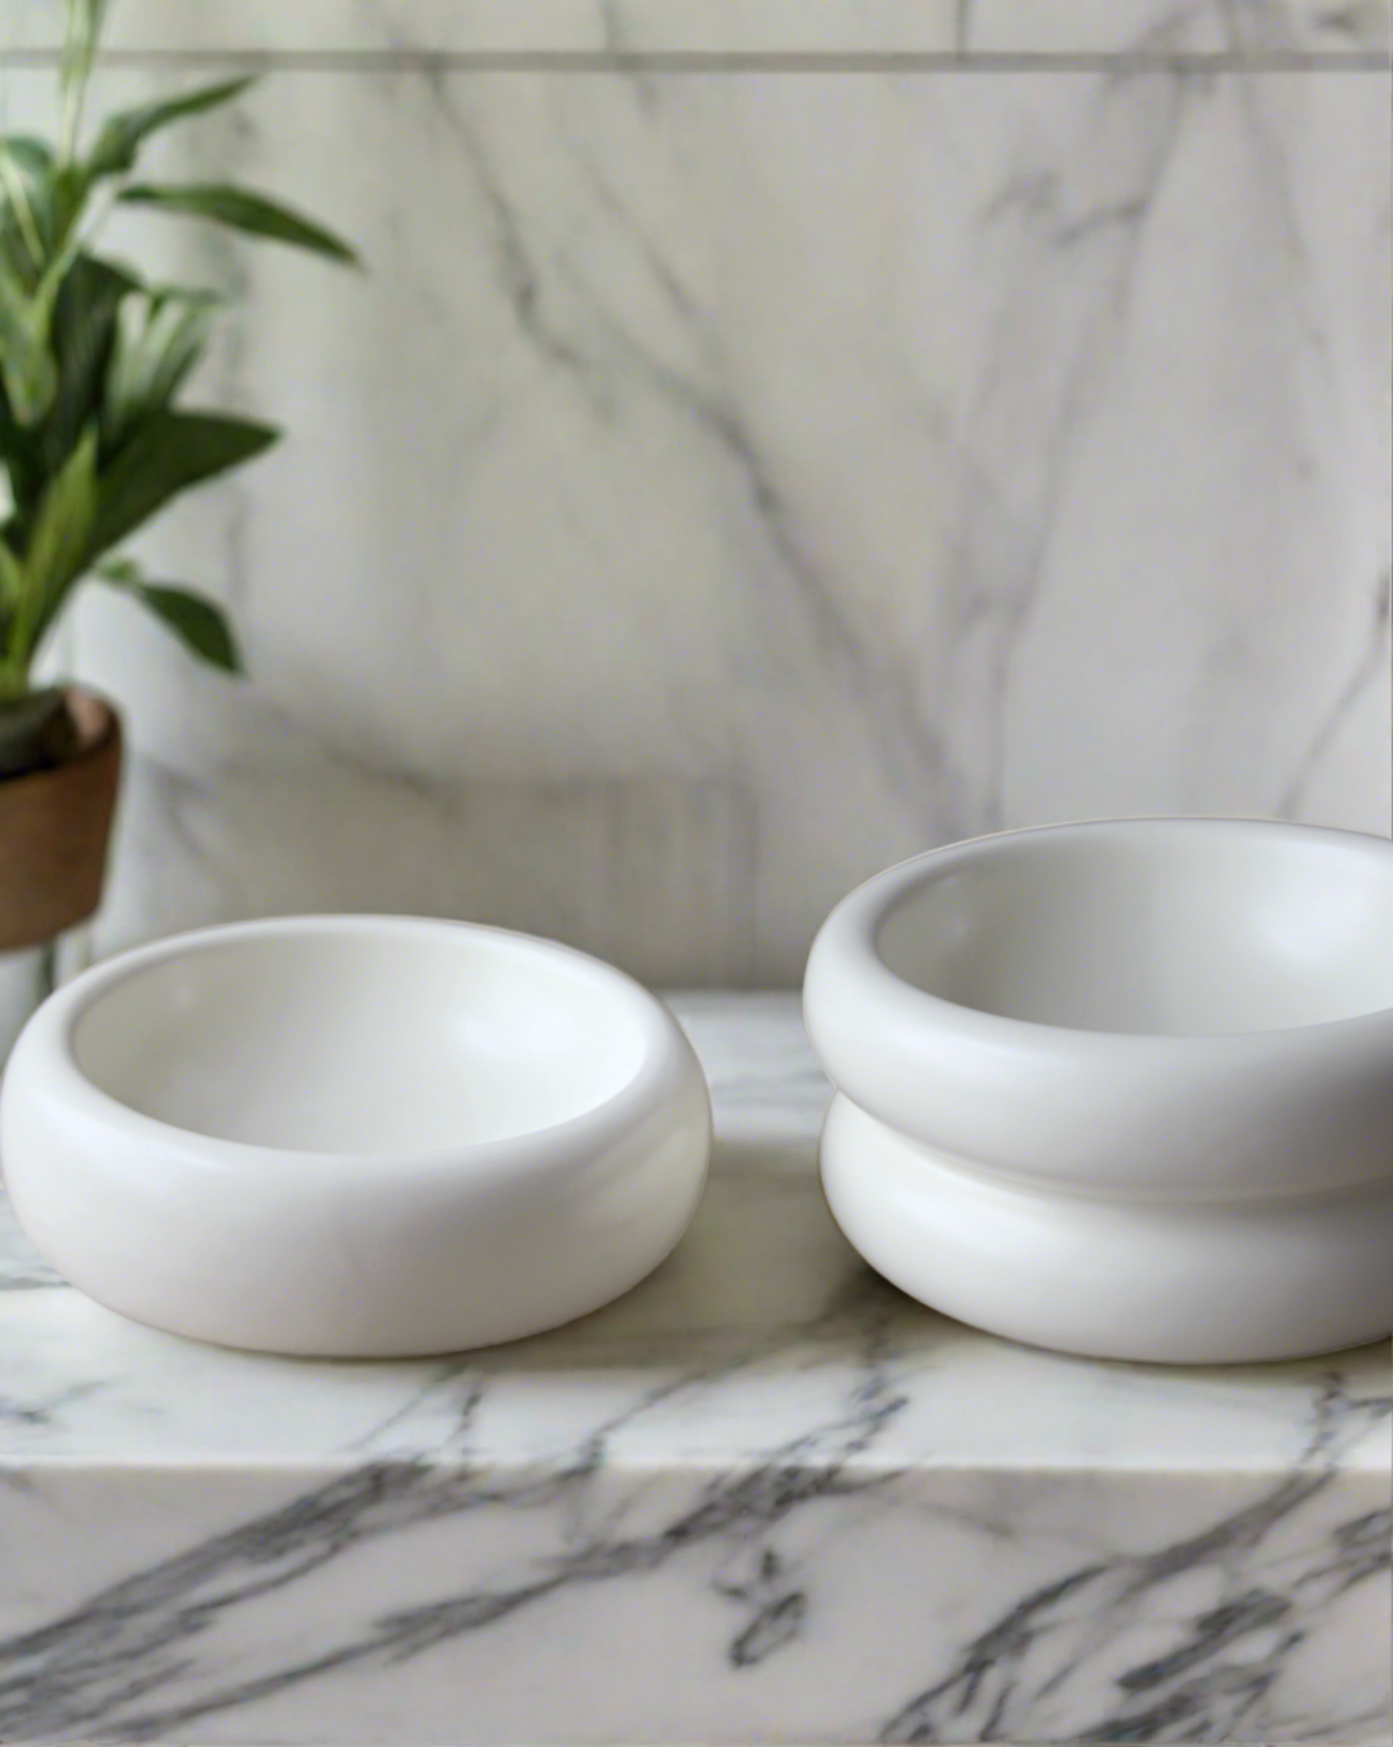 The Modern Muse Pet Bowl Set is crafted from quality ceramic, which is both chic and practical. Home decor friendly, this bowl set pairs one low bowl with one high for the perfect combo.